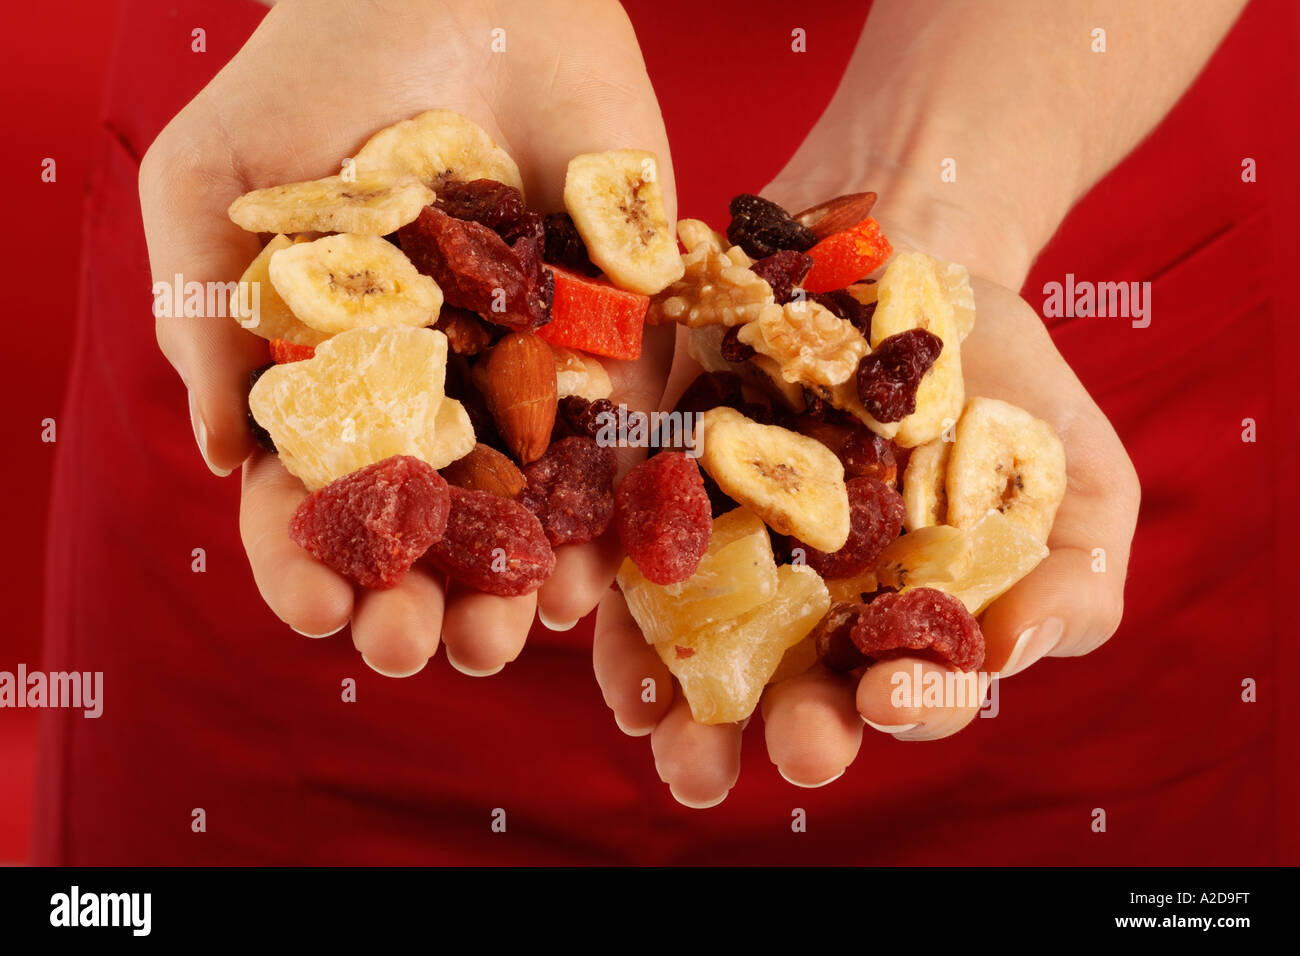 WOMAN HOLDING HANDFUL OF DRIED FRUIT AND NUTS Stock Photo